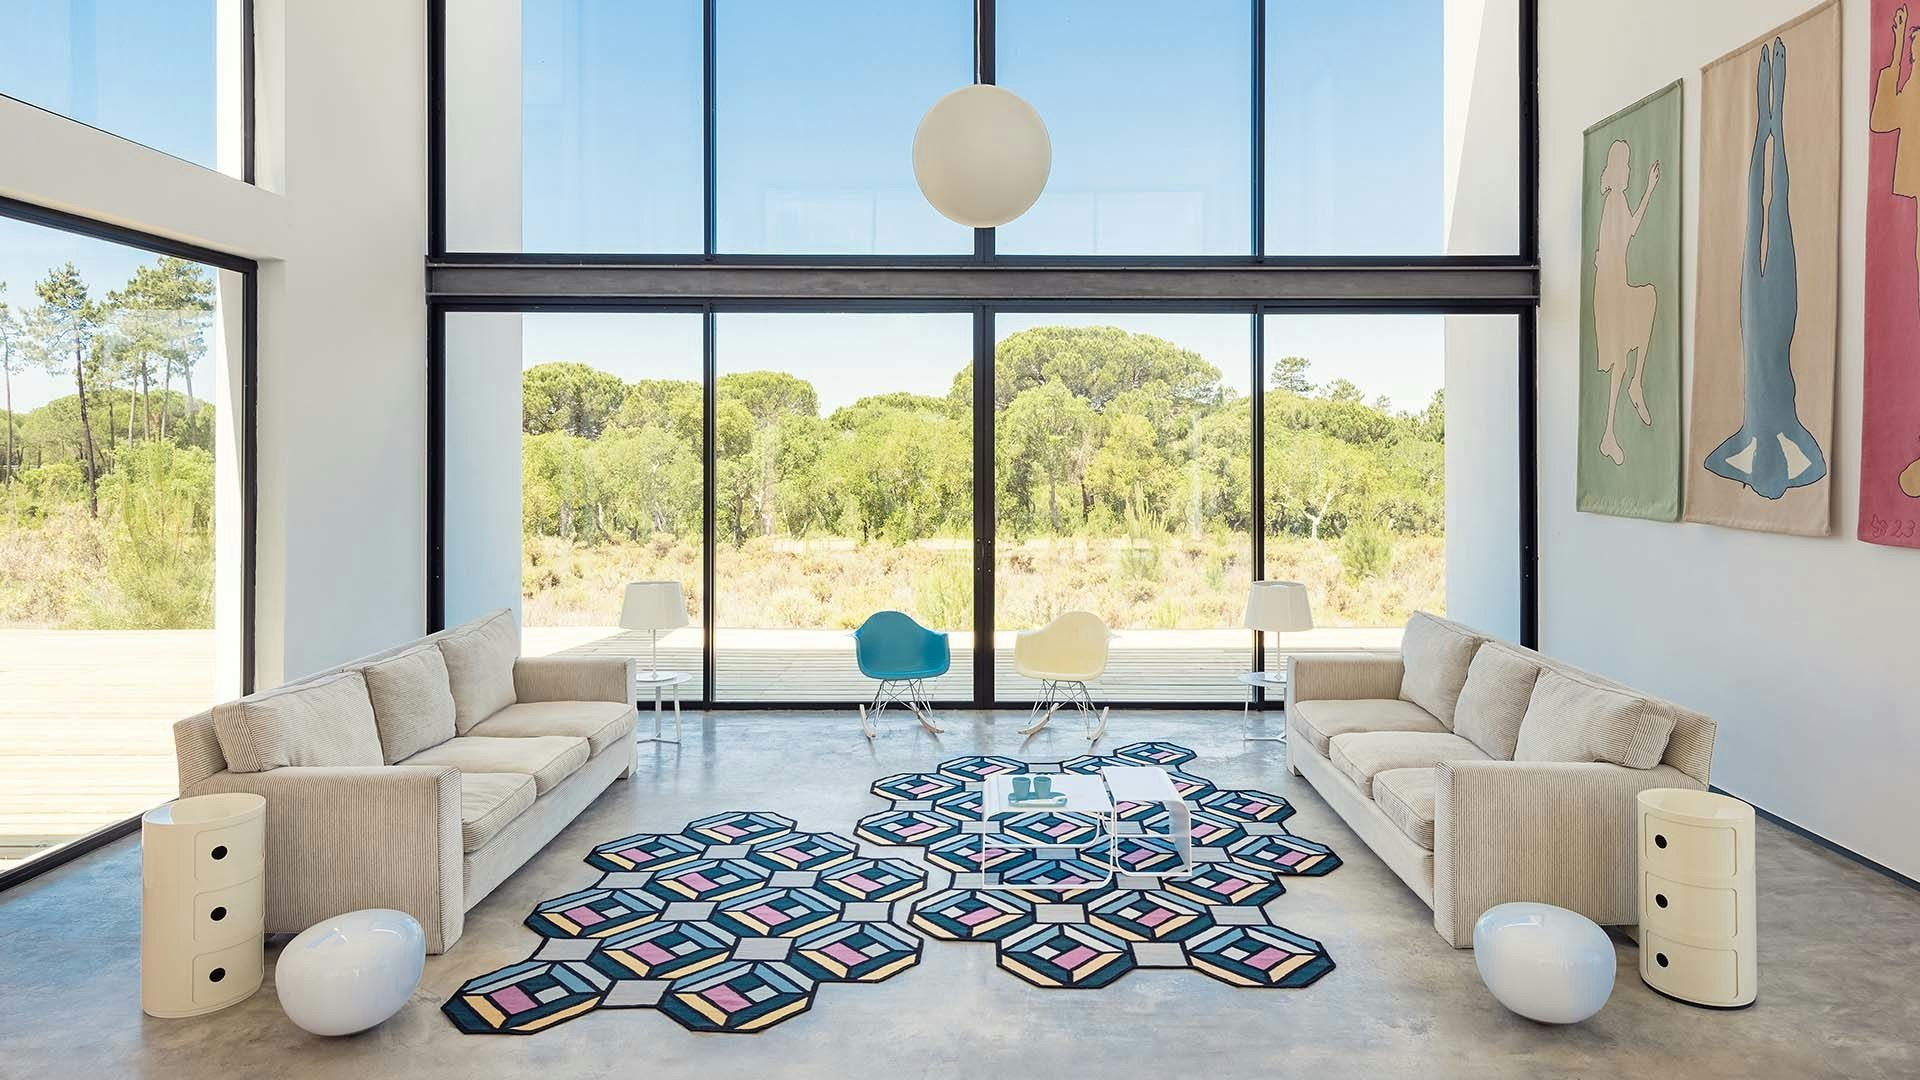 Textiles and Rugs Designed By Patricia Urquiola